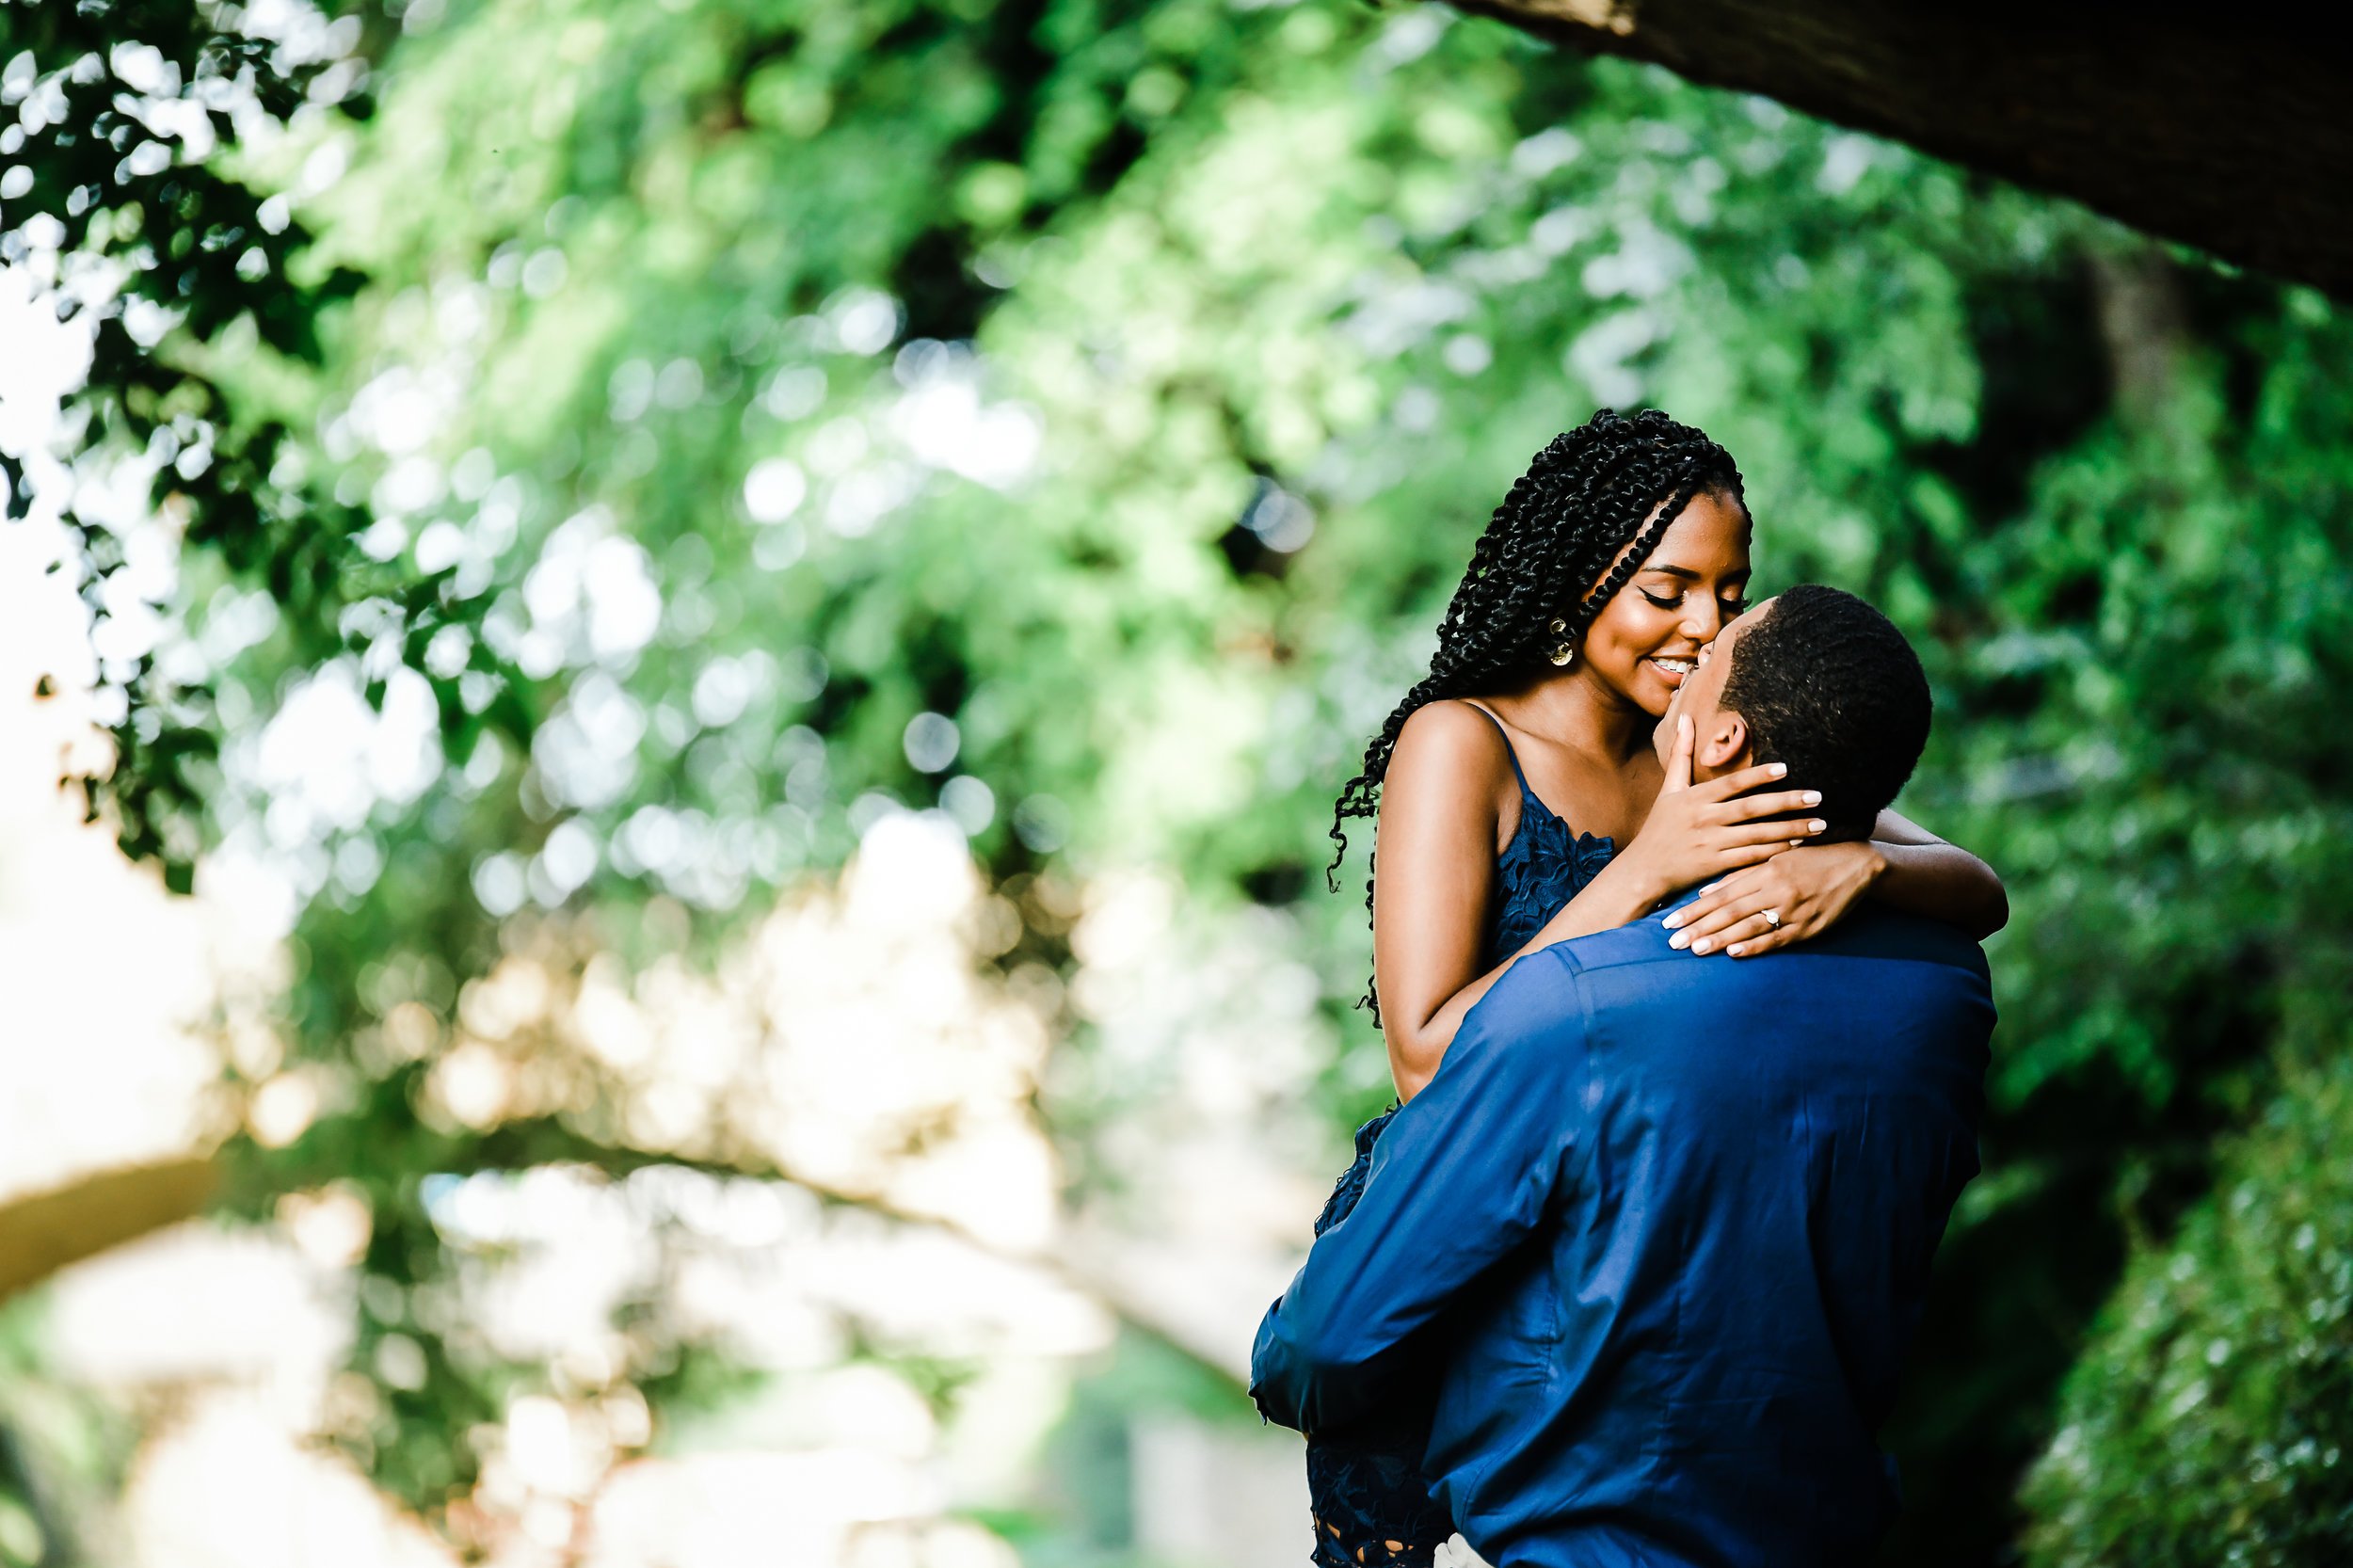 Engagement session in summertime Georgetown